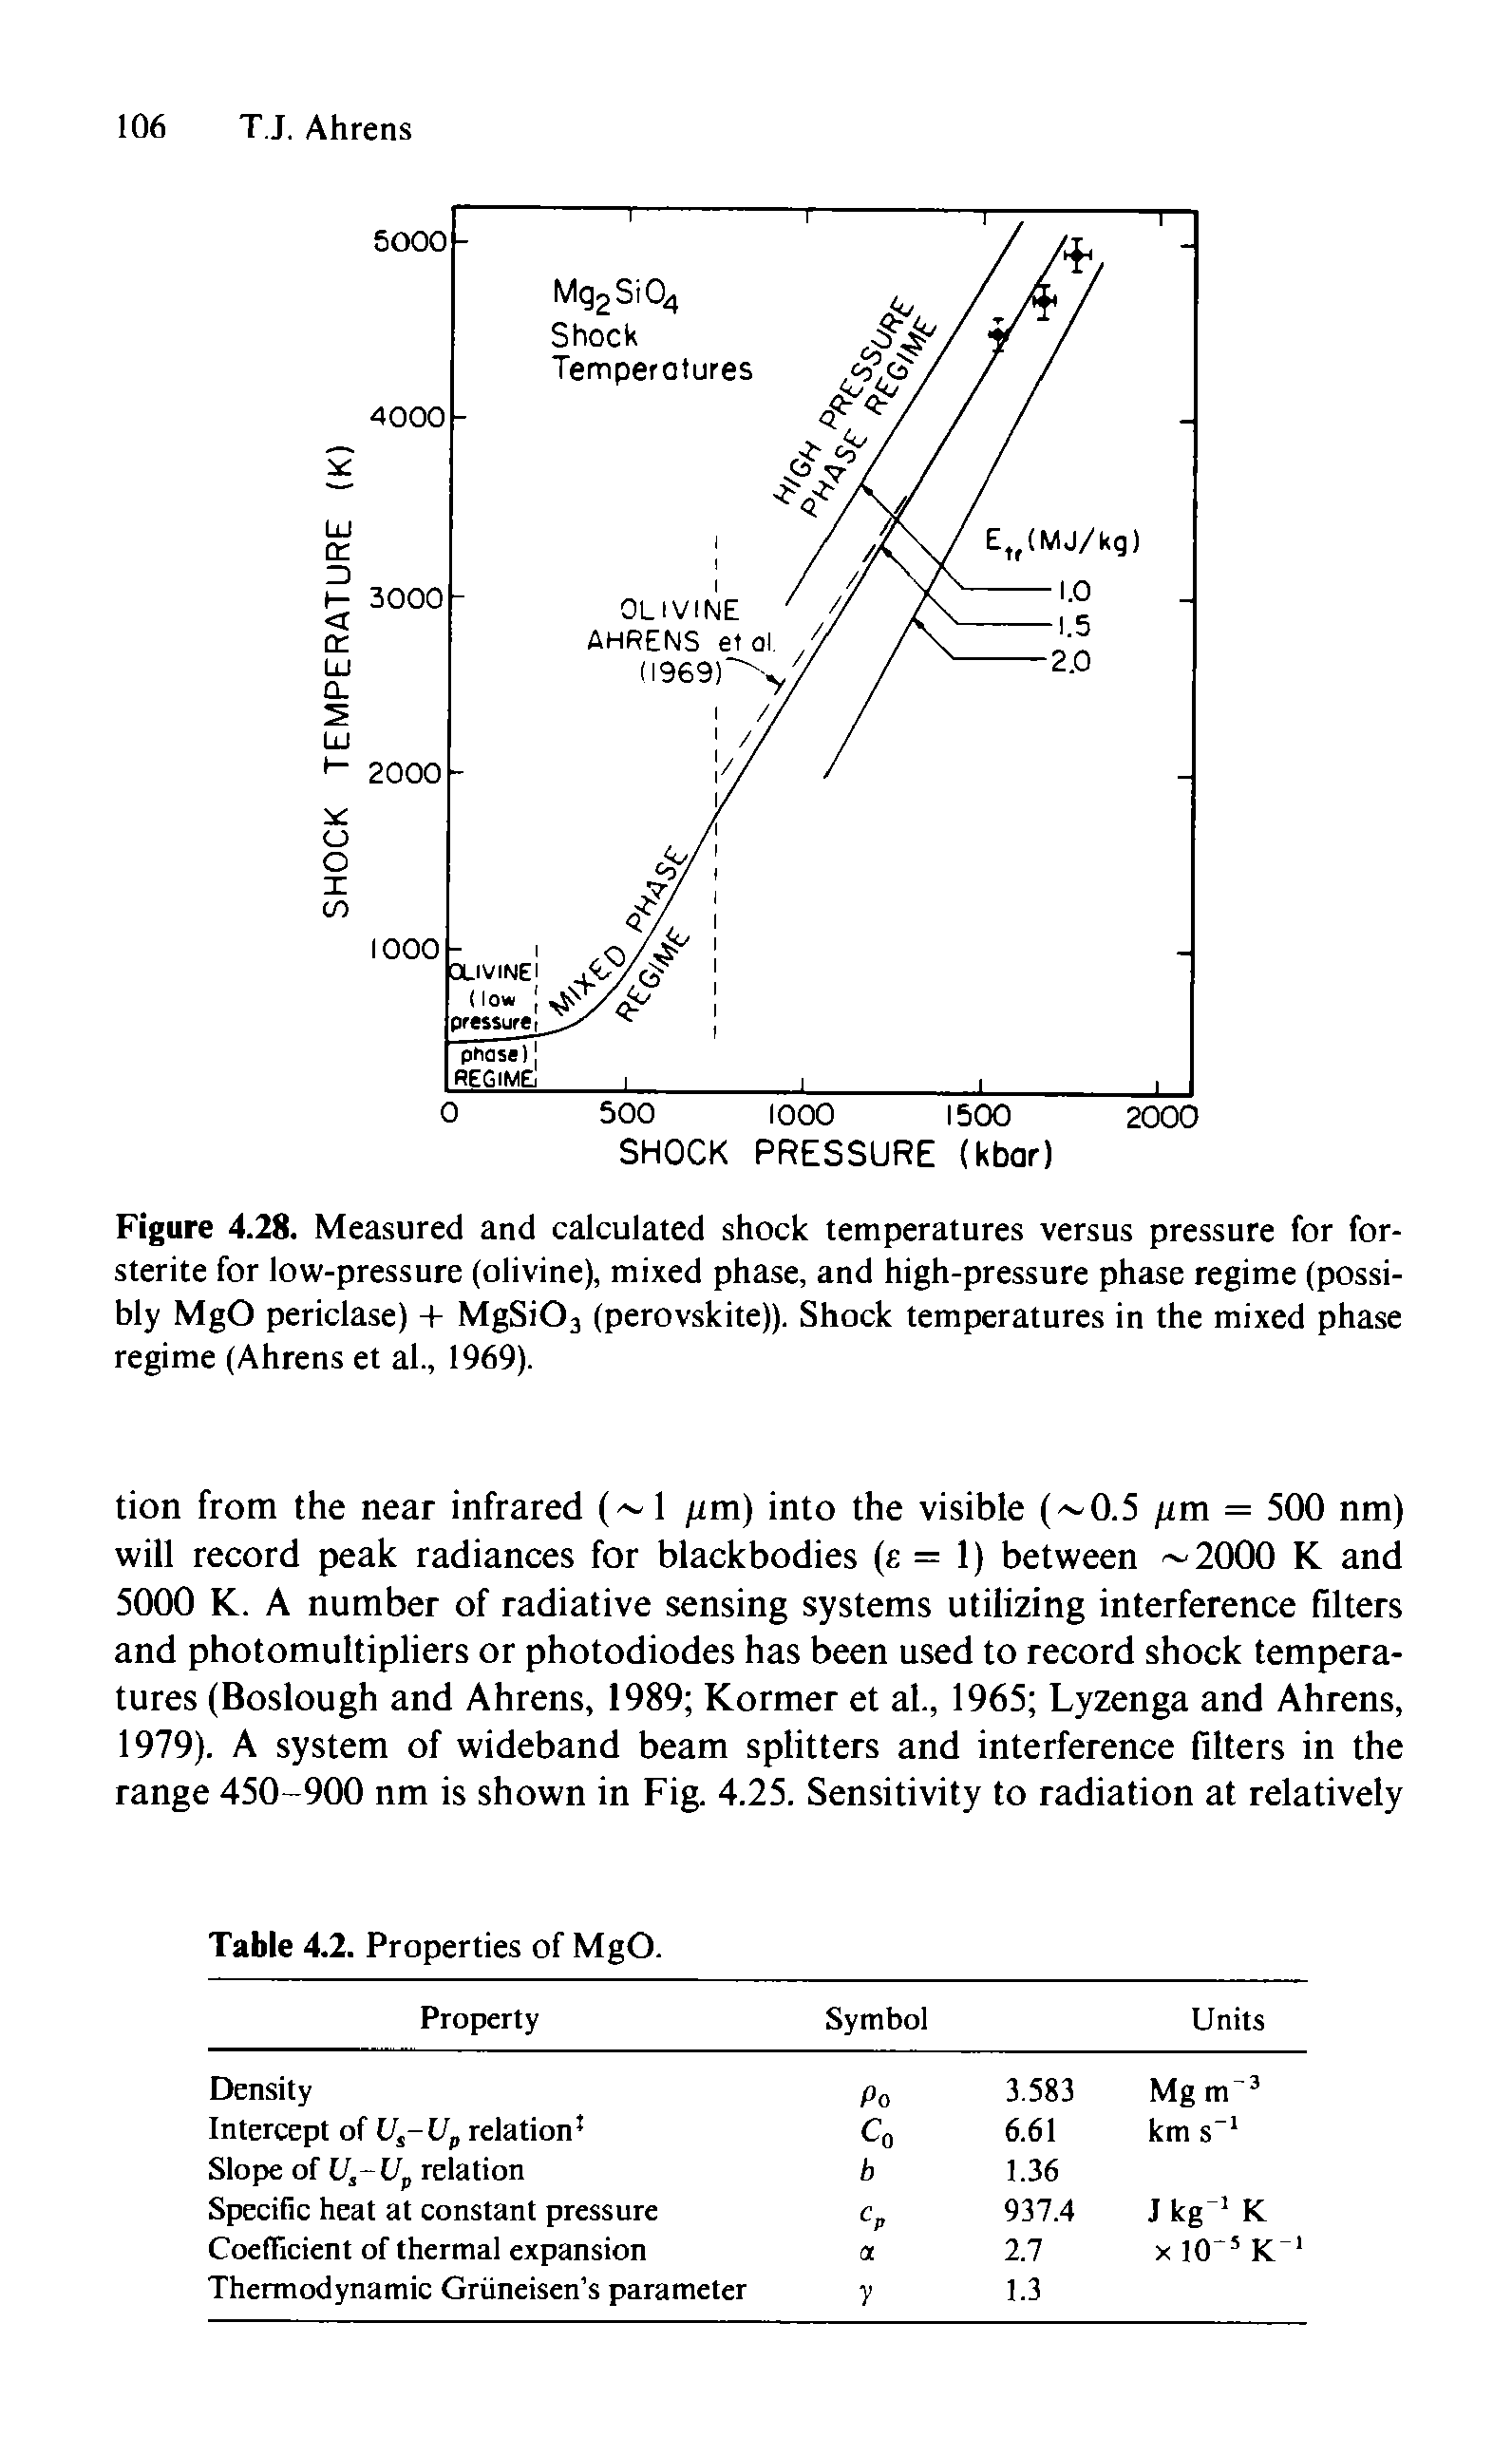 Figure 4.28. Measured and calculated shock temperatures versus pressure for for-sterite for low-pressure (olivine), mixed phase, and high-pressure phase regime (possibly MgO periclase) -I- MgSi03 (perovskite)). Shock temperatures in the mixed phase regime (Ahrens et al., 1969).